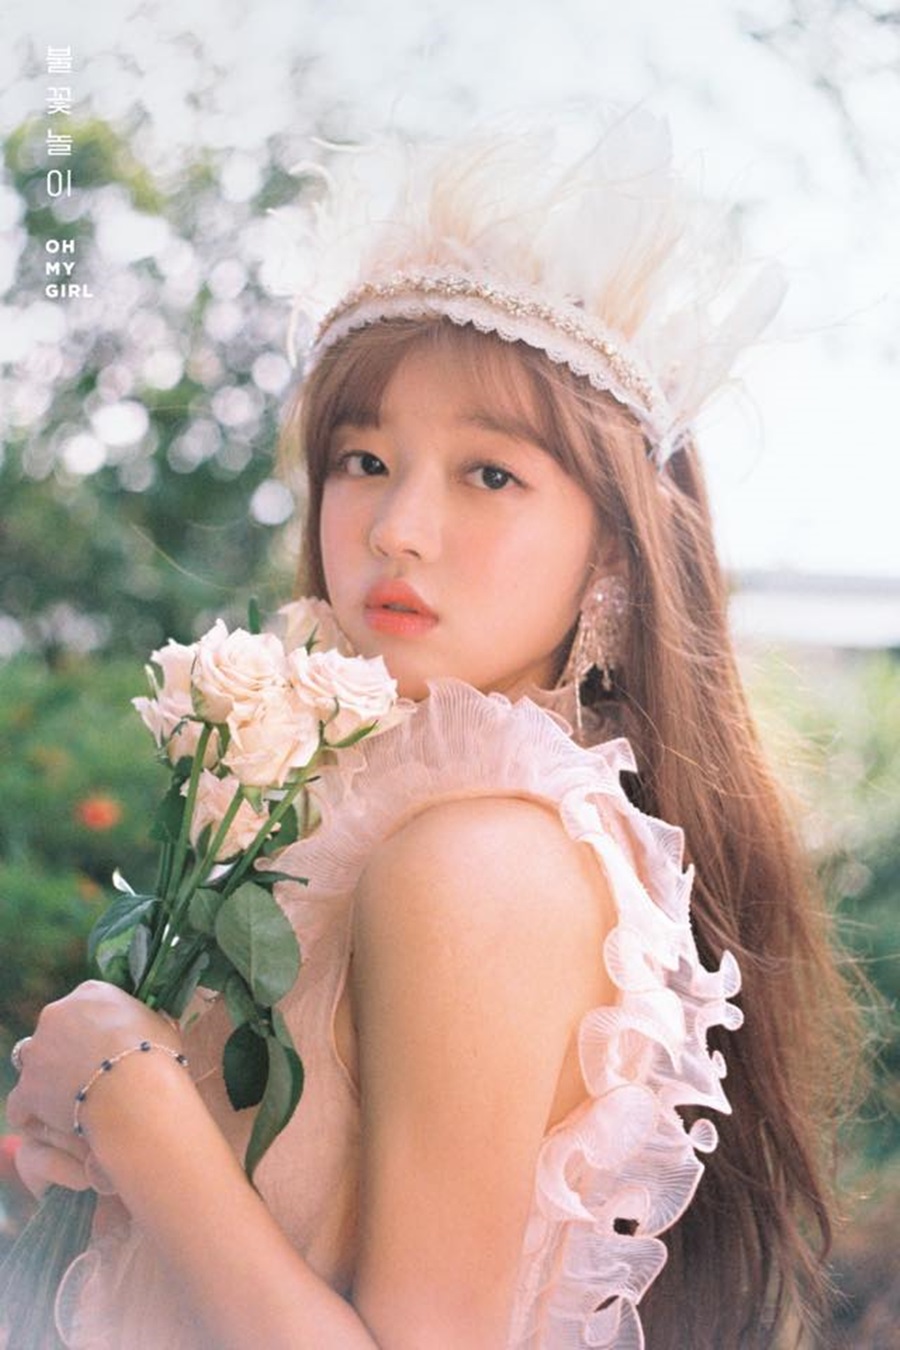 It is a concept that is out of the expectation, and it leads to the reaction of OH MY GIRL. Concept fairy, this word best expresses OH MY GIRL.OH MY GIRLs comeback makes everyone look forward to it, as it always comes back to a different concept.The expectation that this concept was this concept last time, this time is meaningless in front of OH MY GIRL.When everyone is tilting their heads, OH MY GIRL has created the concept as the color of OH MY GIRL and built the genre of OH MY GIRL.This time, too.OH MY GIRL, which sang about its own wishes with the Secret Garden in January and delivered comfort, hope and healing, wore a cute charm that could not be opposed to the first unit OH MY GIRL Banhana.OH MY GIRL, which has always exceeded expectations, is the sixth mini album released this time, Remember Me.OH MY GIRL, which collected topics from the comeback promotion to the unexpected teaser image, changed first from visual to costume.It was a concept fairy, but change was always worrying.When I first heard it, I had an EDM sound that was more intense than I thought, but it was nice to have a different concept.I was worried about how to do it by burying the color of OH MY GIRL. I was concerned about voice tone, choreography, facial expression, and performance.Its true that OH MY GIRL is heavily colored, but Im worried about it. (Hyojeong)The EDM sound is intense, but the more I go back, the more Suh Jung and emotional I think of the Secret Garden.I thought you might look intense at first when you hear it, but youd be getting more and more Feelings familiar with the color of OH MY GIRL. (Mimi)To be honest, I dont think its a concept that many people have been waiting for OH MY GIRL.It is different from the concept that many people expect, but I think this is the color of OH MY GIRL.I want to show you that our musical spectrum can be wider in this album, so I wanted to challenge it more, and I prepared it harder. (Binnie)The title song Fireworks Wednesday, which begins with an intense EDM sound like the words of OH MY GIRL members, is quite different from the Secret Garden, which won the first trophy to OH MY GIRL eight months ago.But behind the intense EDM sound, Suh Jung lyrics and OH MY GIRL members voices are put on, giving a little more intense healing.It can be reminiscent of the second secret garden.In particular, Fireworks Wednesday has a strong vocal capacity for Binnie, adding to the fun of listening as Mimis rap part increases.I think its time to prepare the album from the moment its a blank season, so I practiced singing a lot because I wanted to show you a good figure, and I tried to sing with various singing methods and vocals.There are many sounds in this song, and I have done a lot of research by changing the method of singing to emphasize it more.  (Binnie)The previous songs with the rap had a rap atmosphere, so there was a free atmosphere when I recorded it.But if there is a reason why it was so hard this time, I thought that if I rap the point between song and song and rap strongly, I could ruin the song atmosphere.I recorded it so that I could fit in as well as I could, so that I could get it on the song as well as possible, and there is a part that the members respond to, and I am enjoying the stage with energy from it. (Mimi)Fireworks Wednesday, which contains hidden efforts by OH MY GIRL, is receiving good response at the same time as it is released.It is a new concept, but the response of OH MY GIRL proved that the length of the OH MY GIRL was not wrong.I liked the response of OH MY GIRL, which I believe and listen to.Even if you have a lot of concepts, it seems that OH MY GIRL melts in the style of OH MY GIRL, and many people believe that OH MY GIRL is like this.It was a thank-you response to the fact that we could feel that what we were doing was not wasted and rewarding. (YooA)Ive changed my costume and makeup, and I appreciate the new but the fans love of it. I appreciate the charm. (Arin)Tell them its good to see our stage during the recording, so Im confident on stage, and Ive never seen a look at us in a good way when Ive seen a direct response.Weve never had a great concept before. I think were getting a new chemie with our fans. (JiHo)OH MY GIRL members who are decorating the music broadcasting stage in a good response also said that they can watch and listen to Fireworks Wednesday more fun.I hope you can take a good look at the camera-like gesture, and theres a part in the choreography that contains the April constellation, the oxen, as it is a song that recalls and remembers beautiful memories.Since April is our debut month, I want you to see Miracle (name of fan club) and choreography with our memories.  (Seung Hee)Theres a big group of members making watches in Seung Hees part. Theyre so pretty.And in the early Do you Remember part, I have a hand-written expression of our support rod, Dee My Bong, and I want you to find it. (JiHo)The members of the OH MY GIRL have good performance, good singing, but they have different concepts.I would like you to concentrate on how the members digest this concept, how they create the atmosphere, and how they express it.Ill show you some nice performance, so please look forward to it. (YouA)I think that the song Fireworks Wednesday is a song that has been well-regarded by each member as many Feelings.I want you to see the unique tone and vocal aspect of the members.  (Binnie)